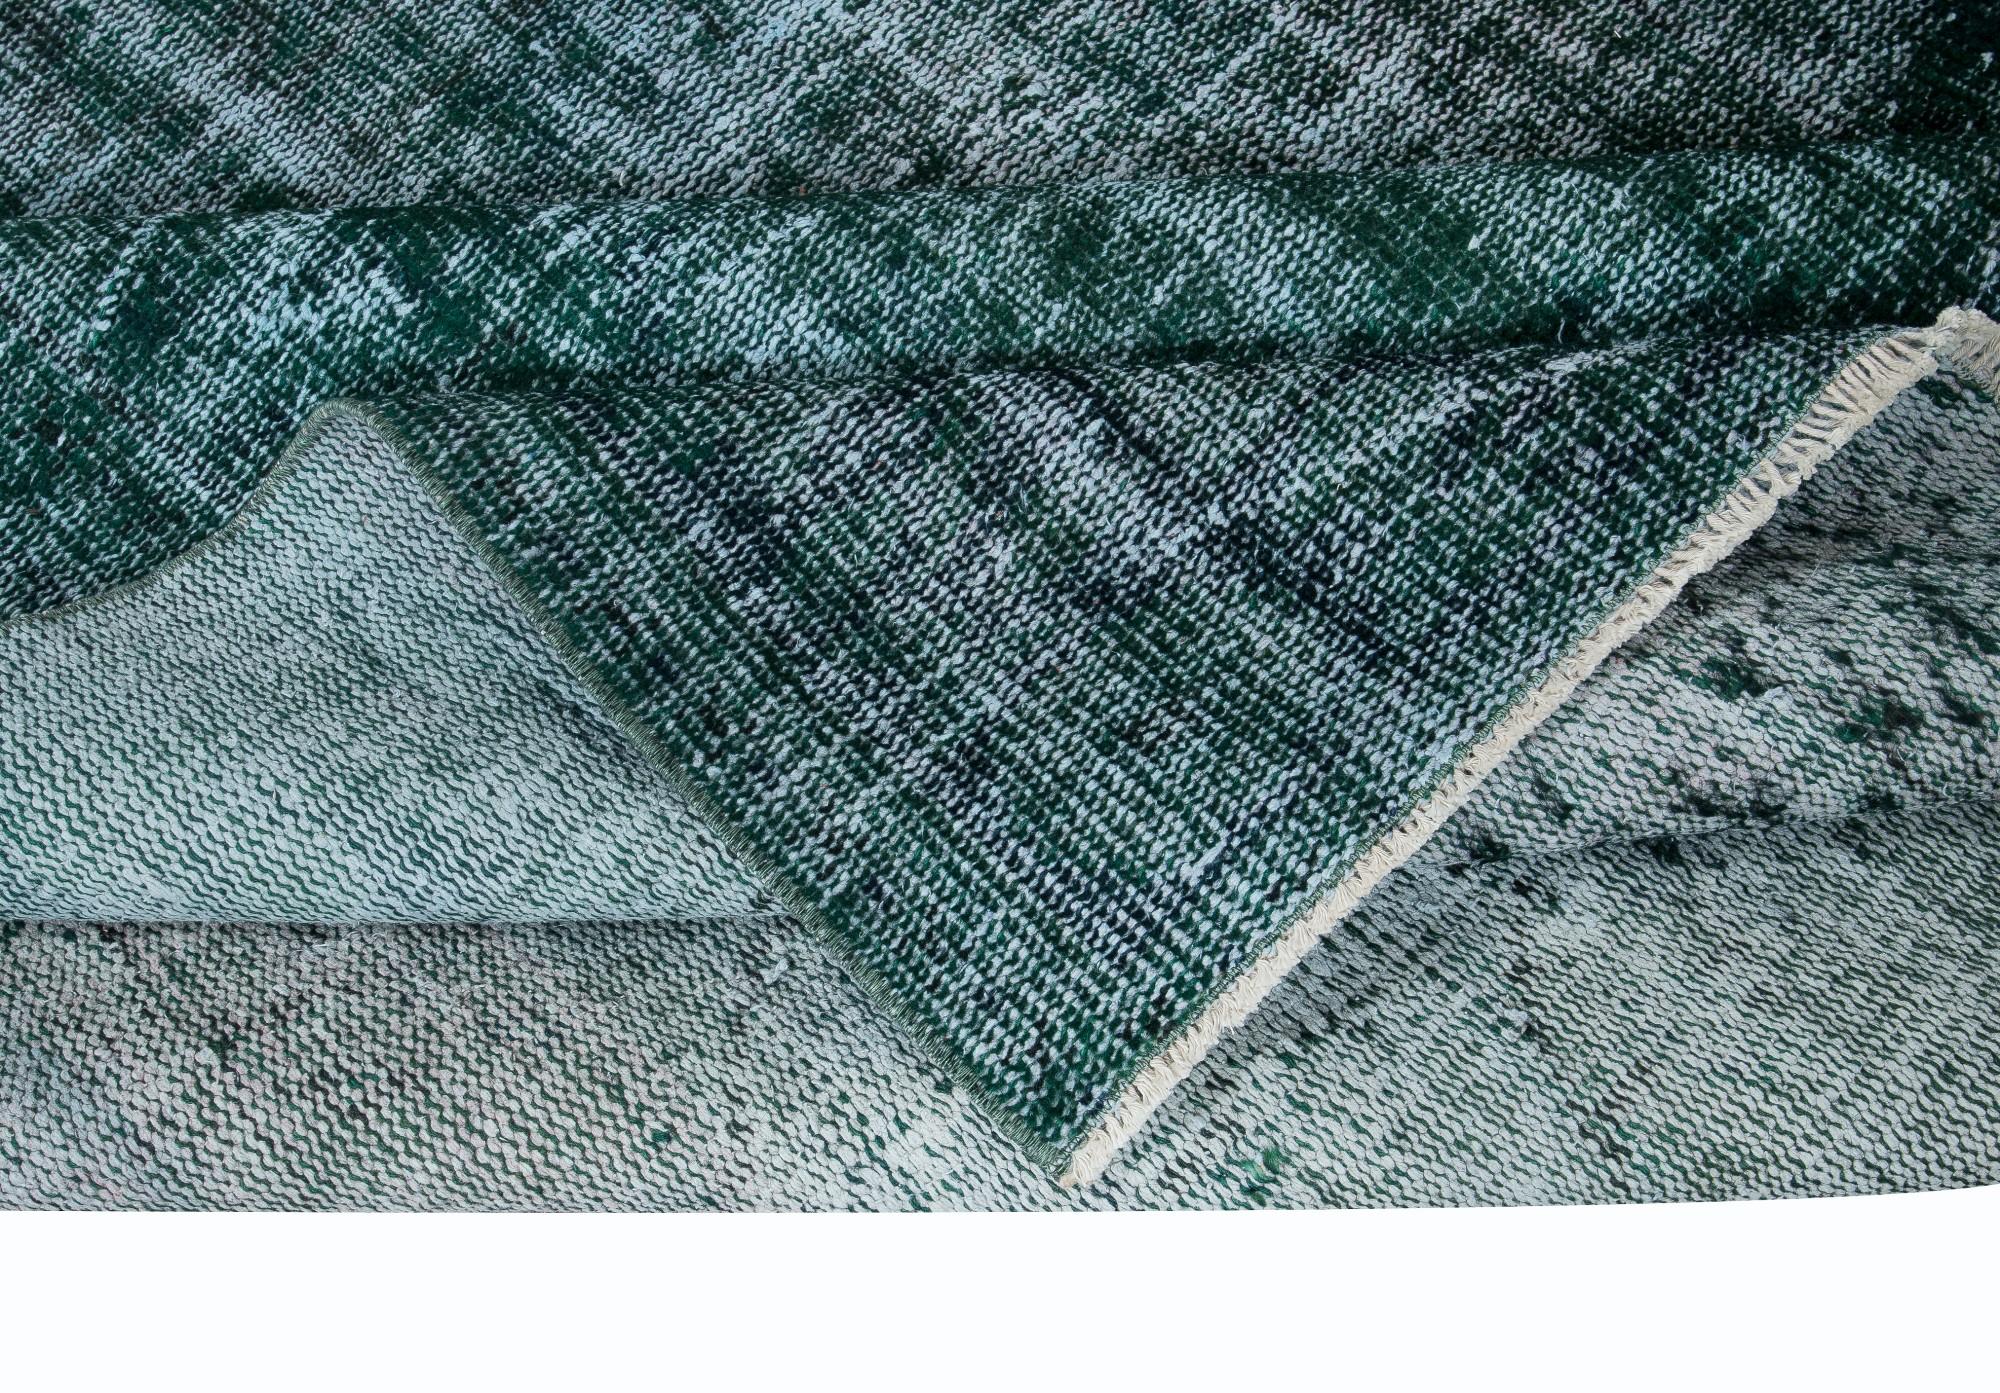 Hand-Knotted 5.2x8.6 Ft Modern Handmade Turkish Green Area Rug with Shabby Chic Style For Sale